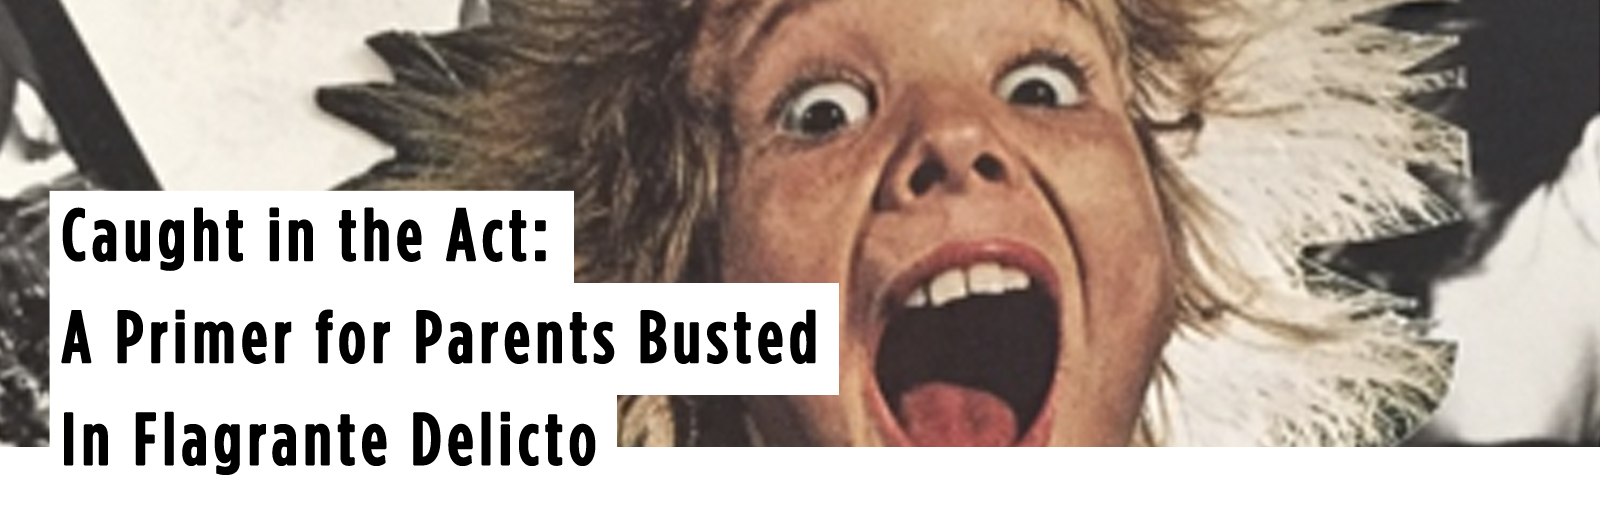 Caught in the Act A Primer for Parents Busted In Flagrante Delicto — Patricia Lawler Kenet